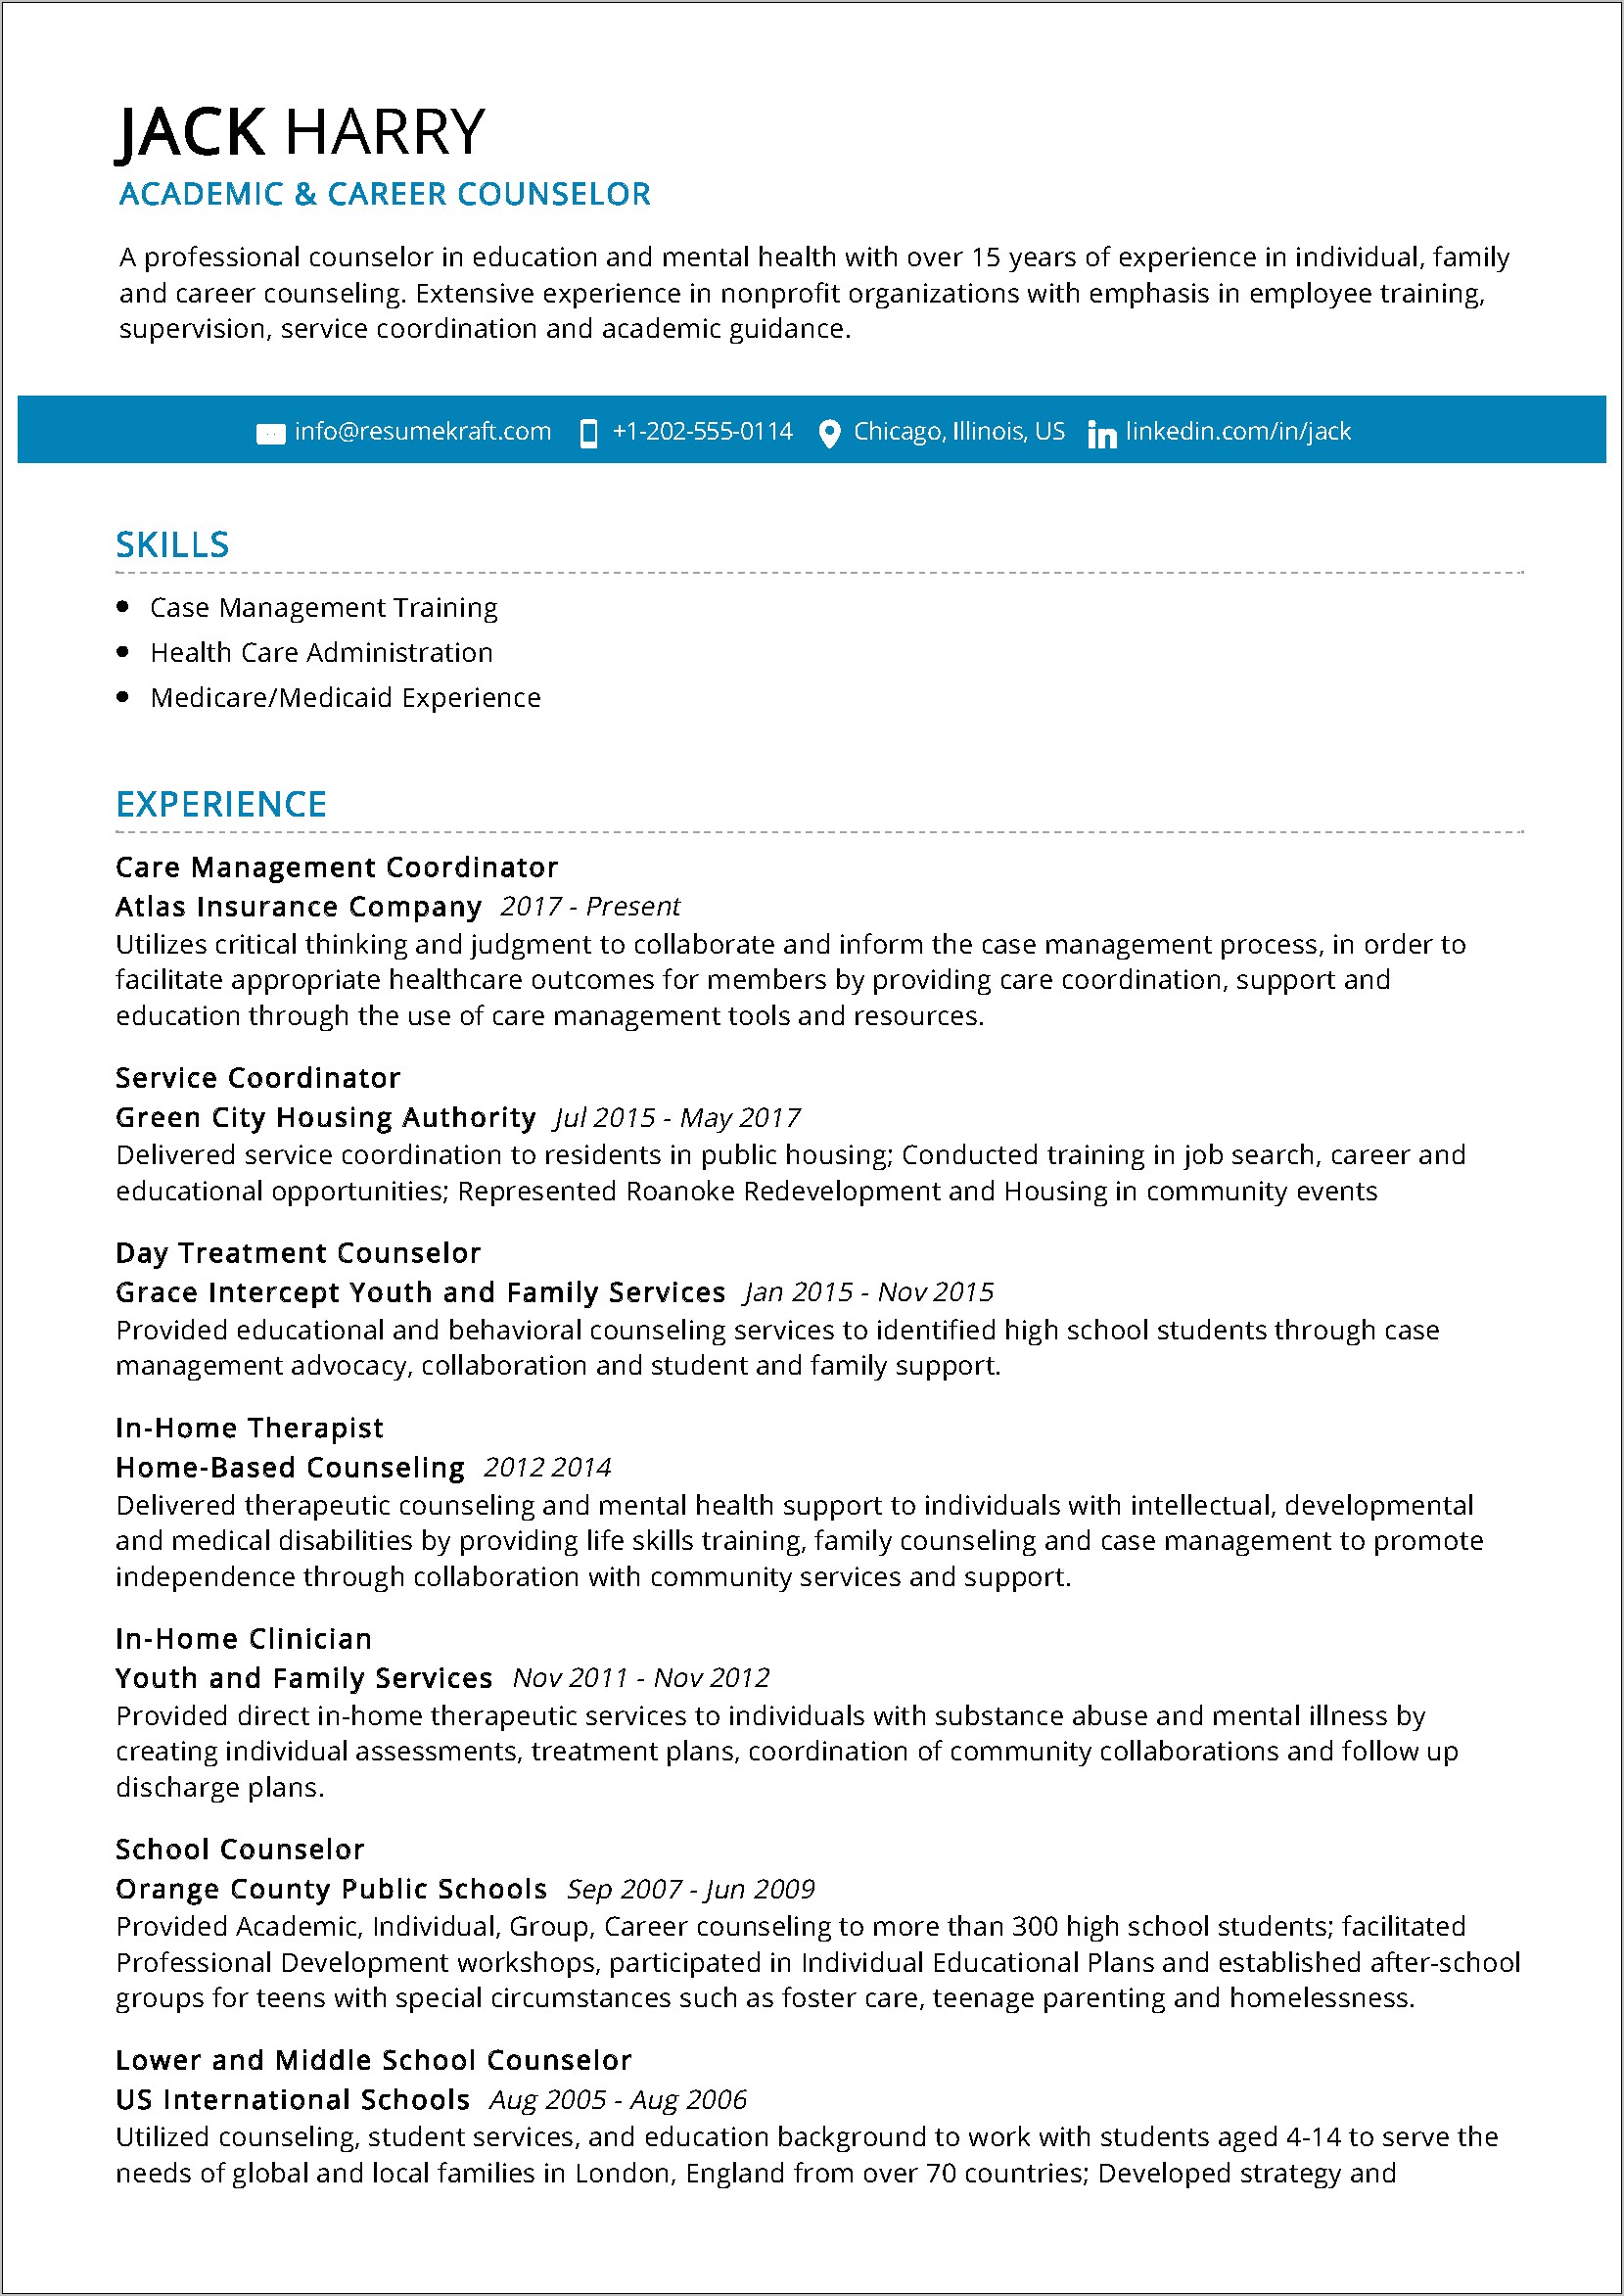 Resume Tips For High School Students Pdf